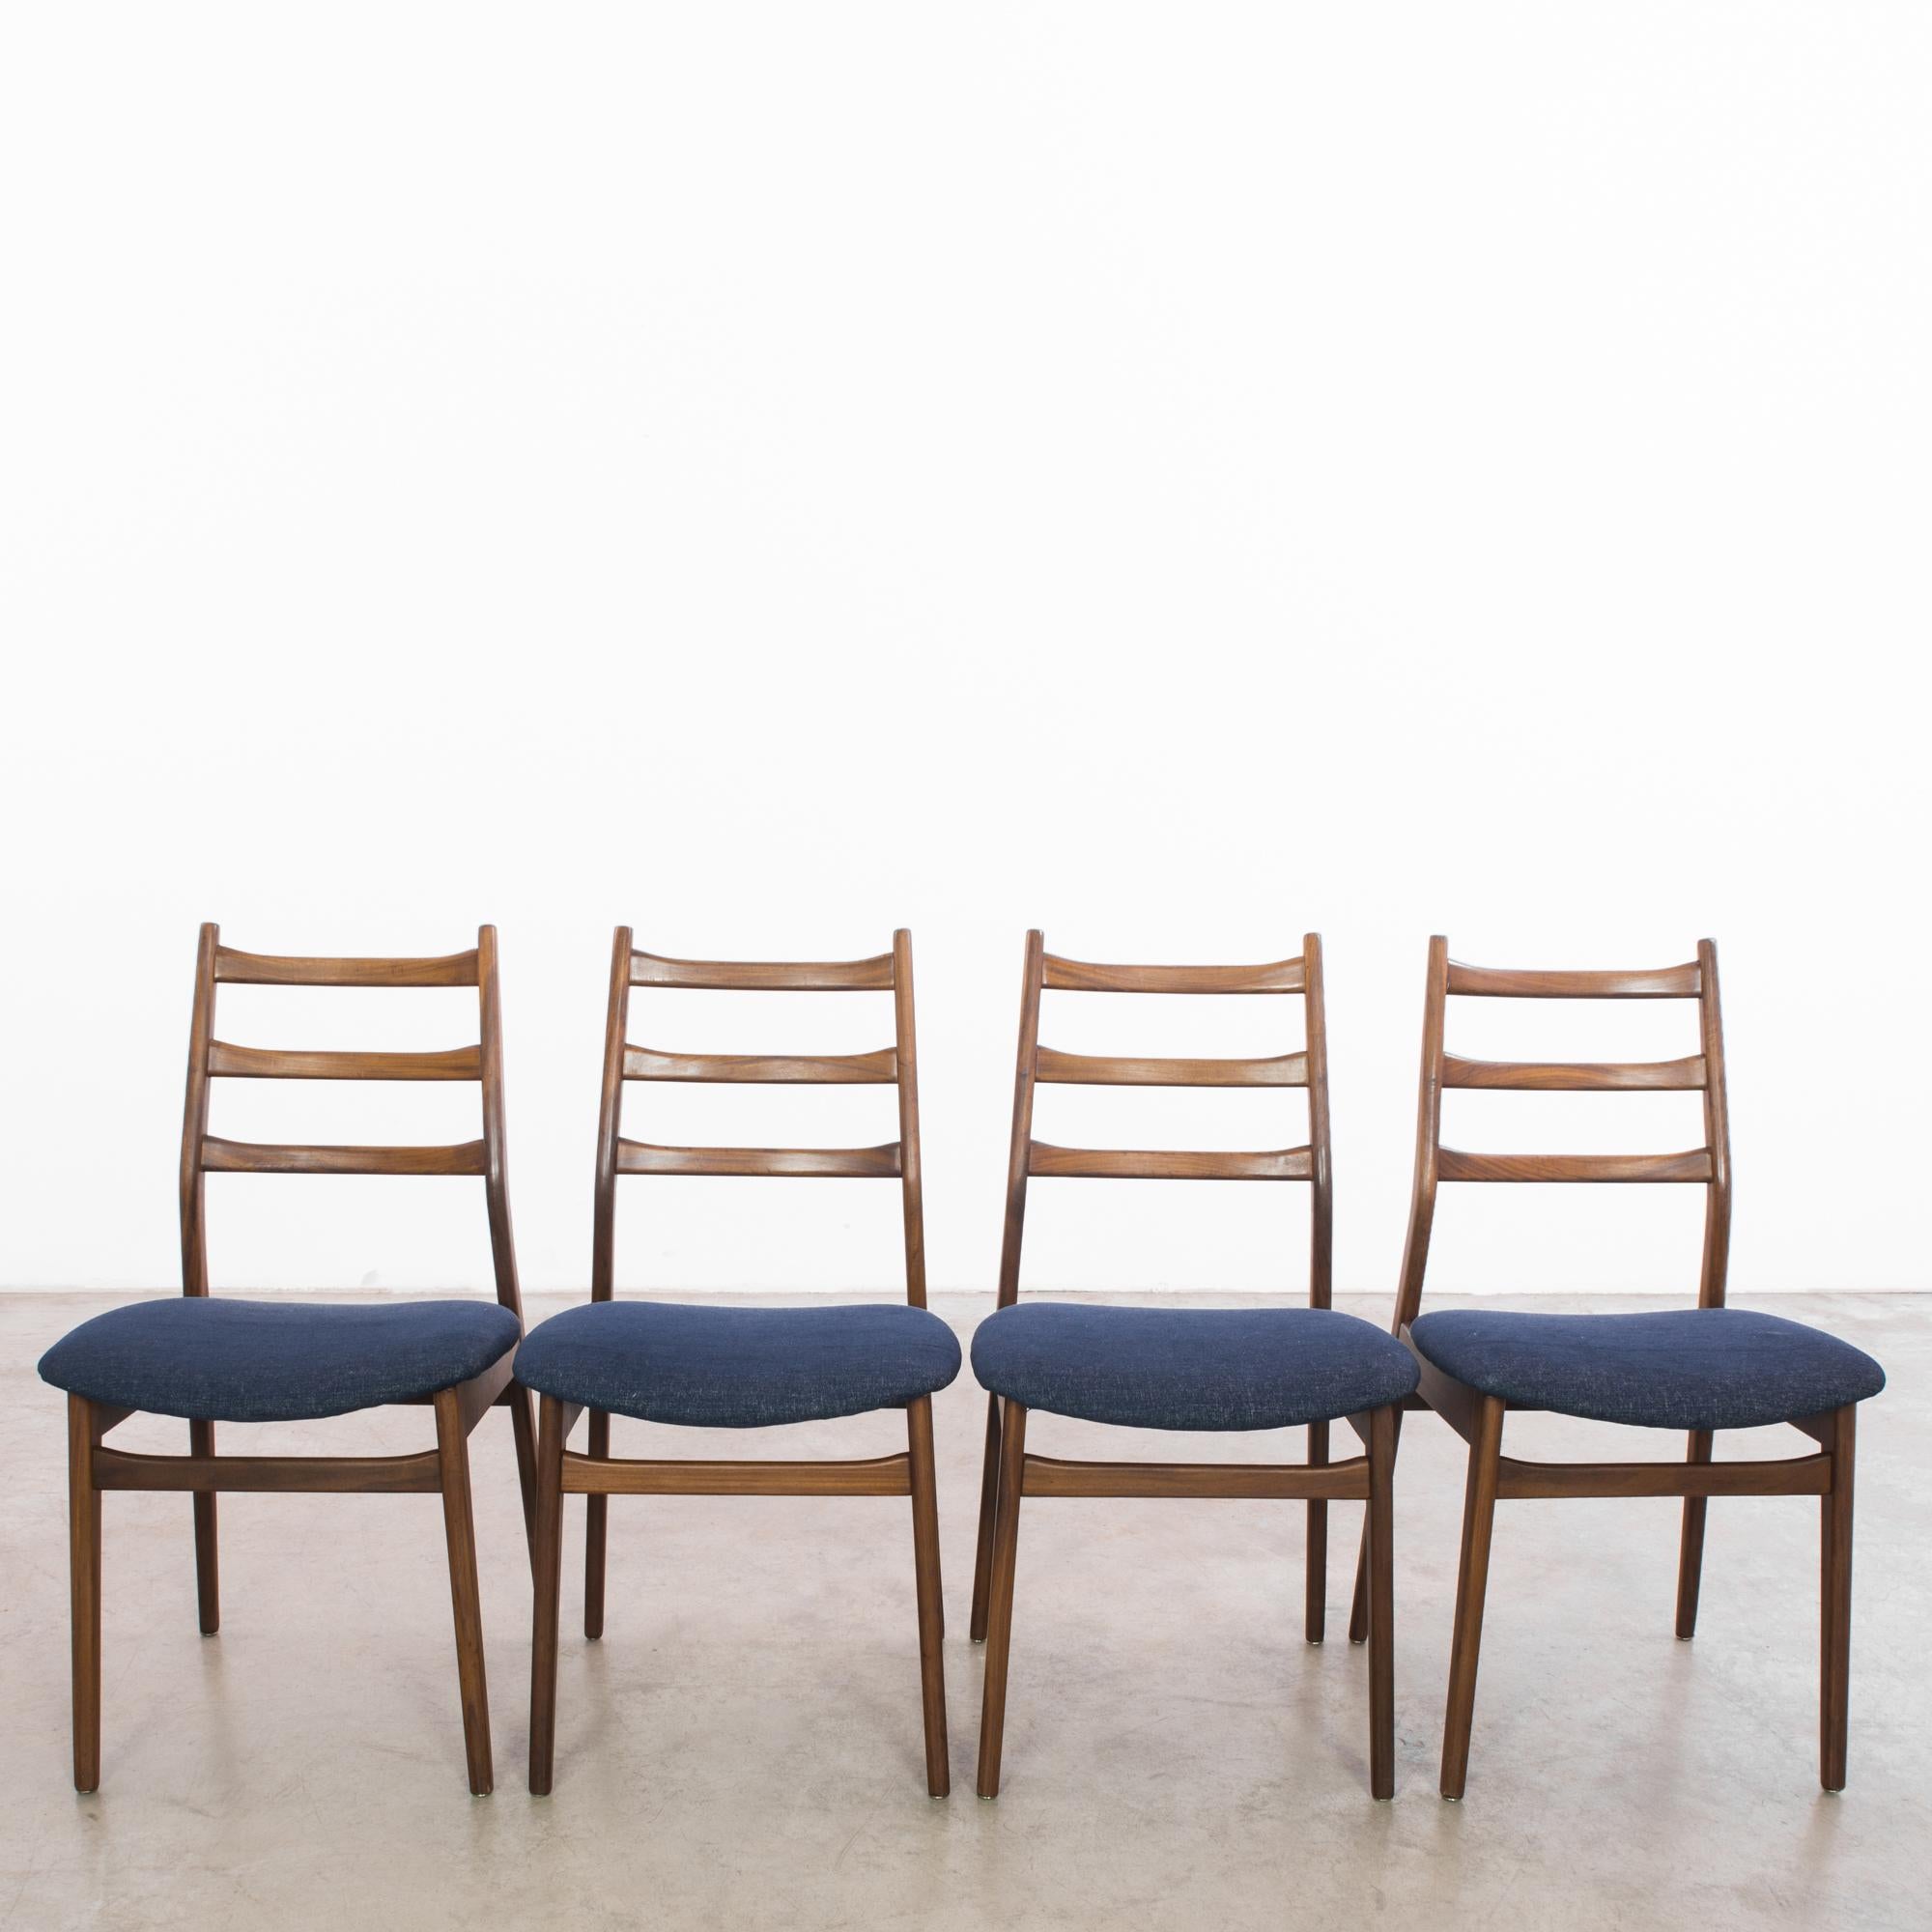 1960s Danish Wooden Chairs with Upholstered Seats, Set of 4 1